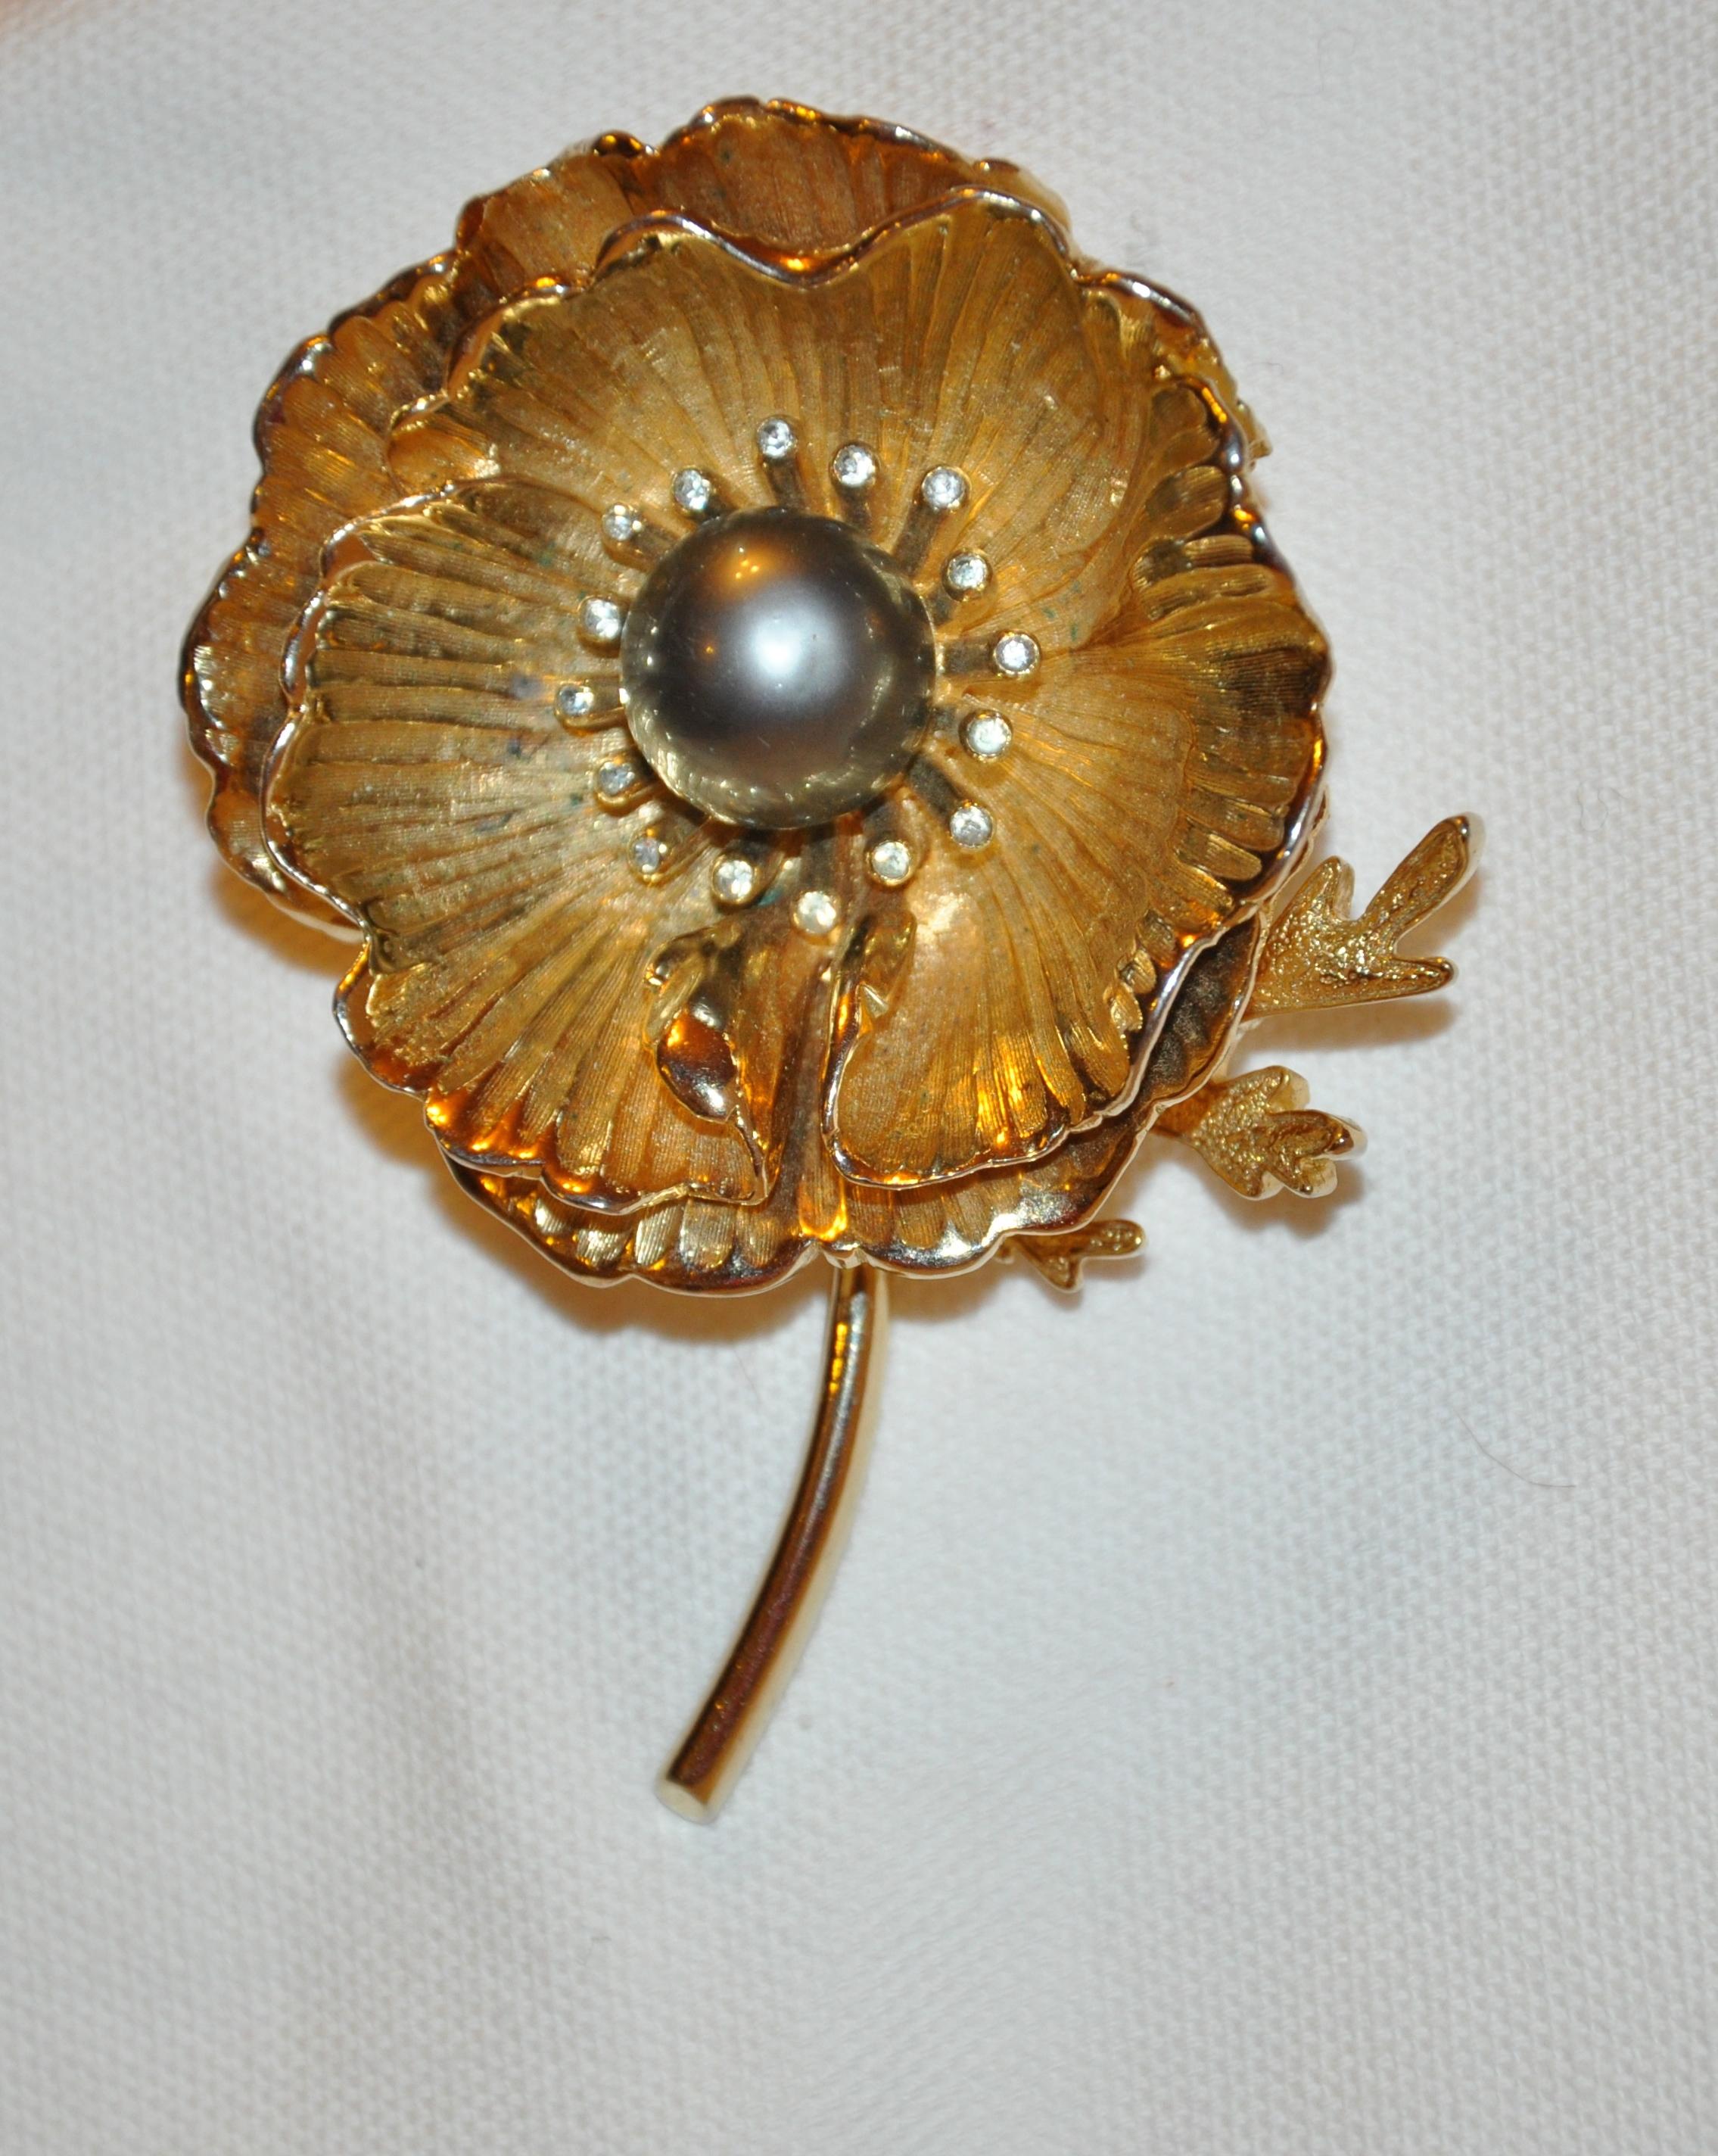        Nettie Rosenstein beautifully large gilded gold vermeil hardware floral brooch detailing a 2-tier layer of petals centered with a large steel-gray 